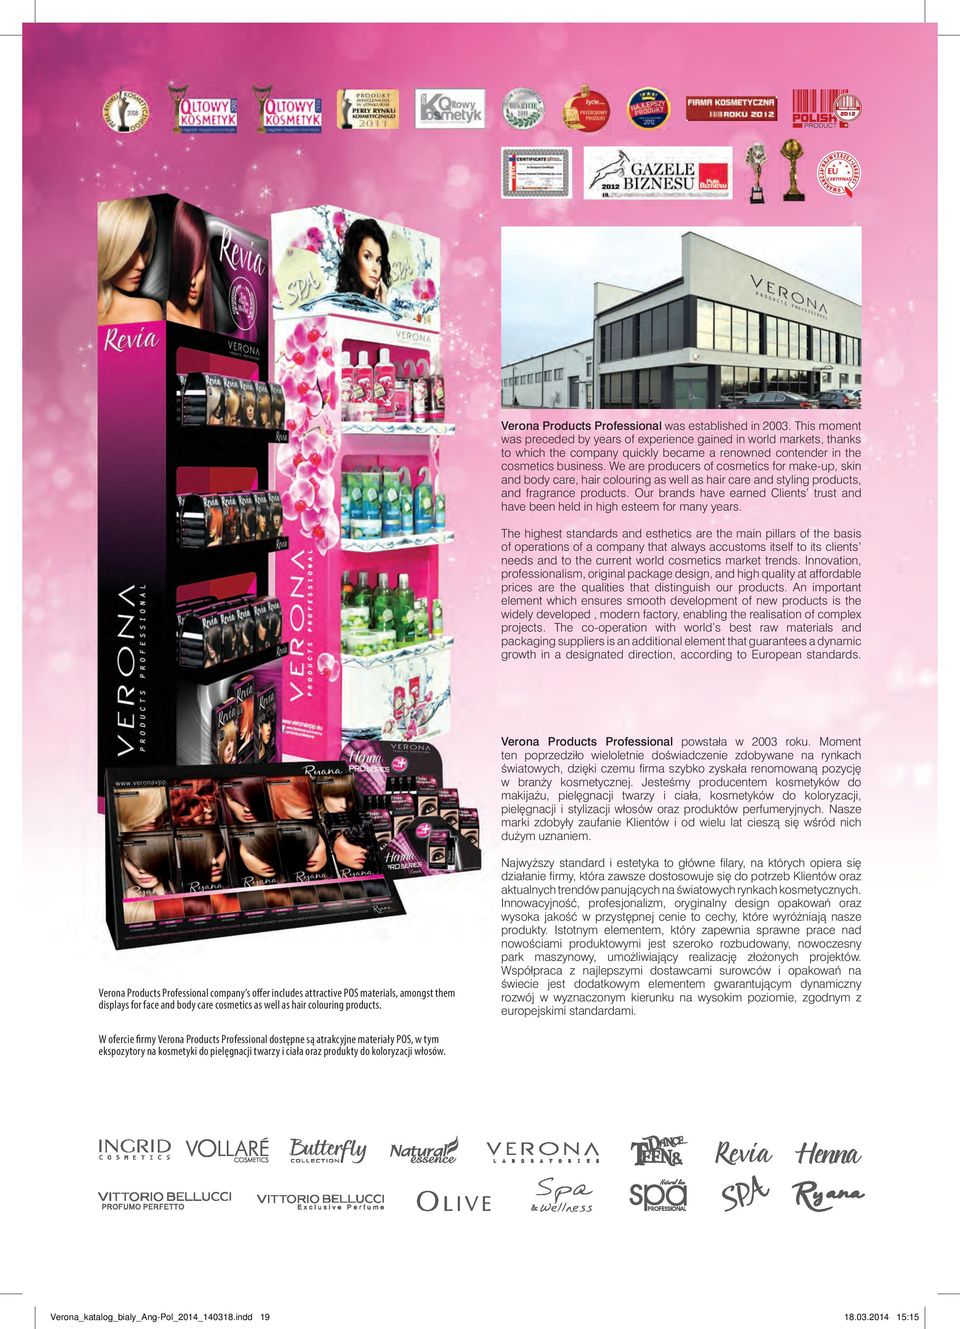 We are producers of cosmetics for make-up, skin and body care, hair colouring as well as hair care and styling products, and fragrance products.